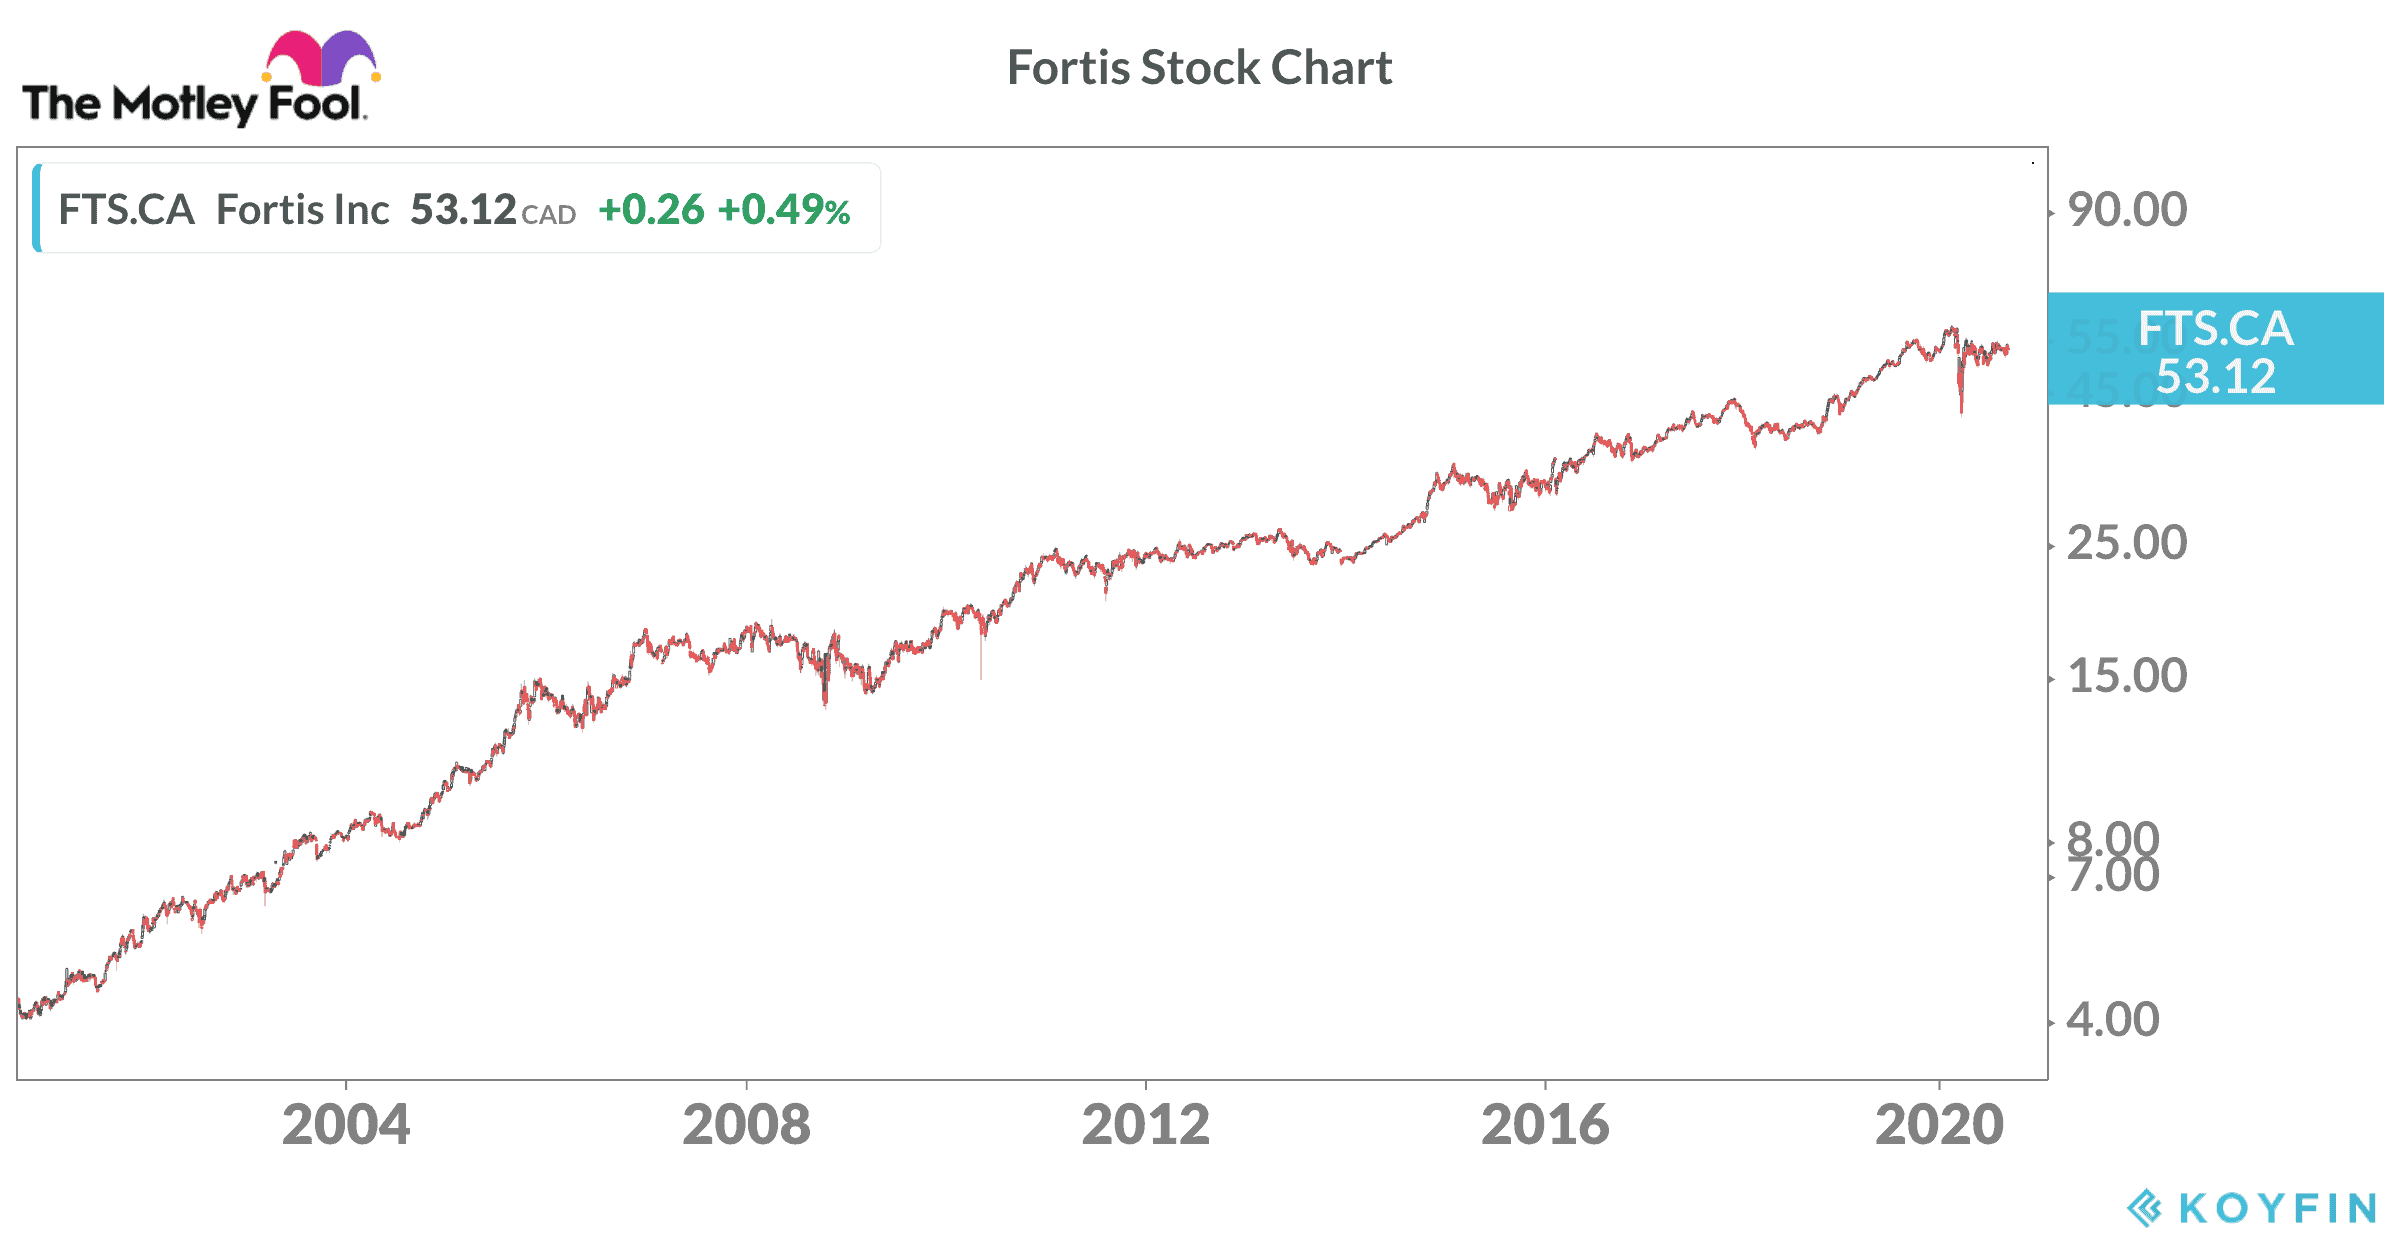 Fortis stock for early retirement